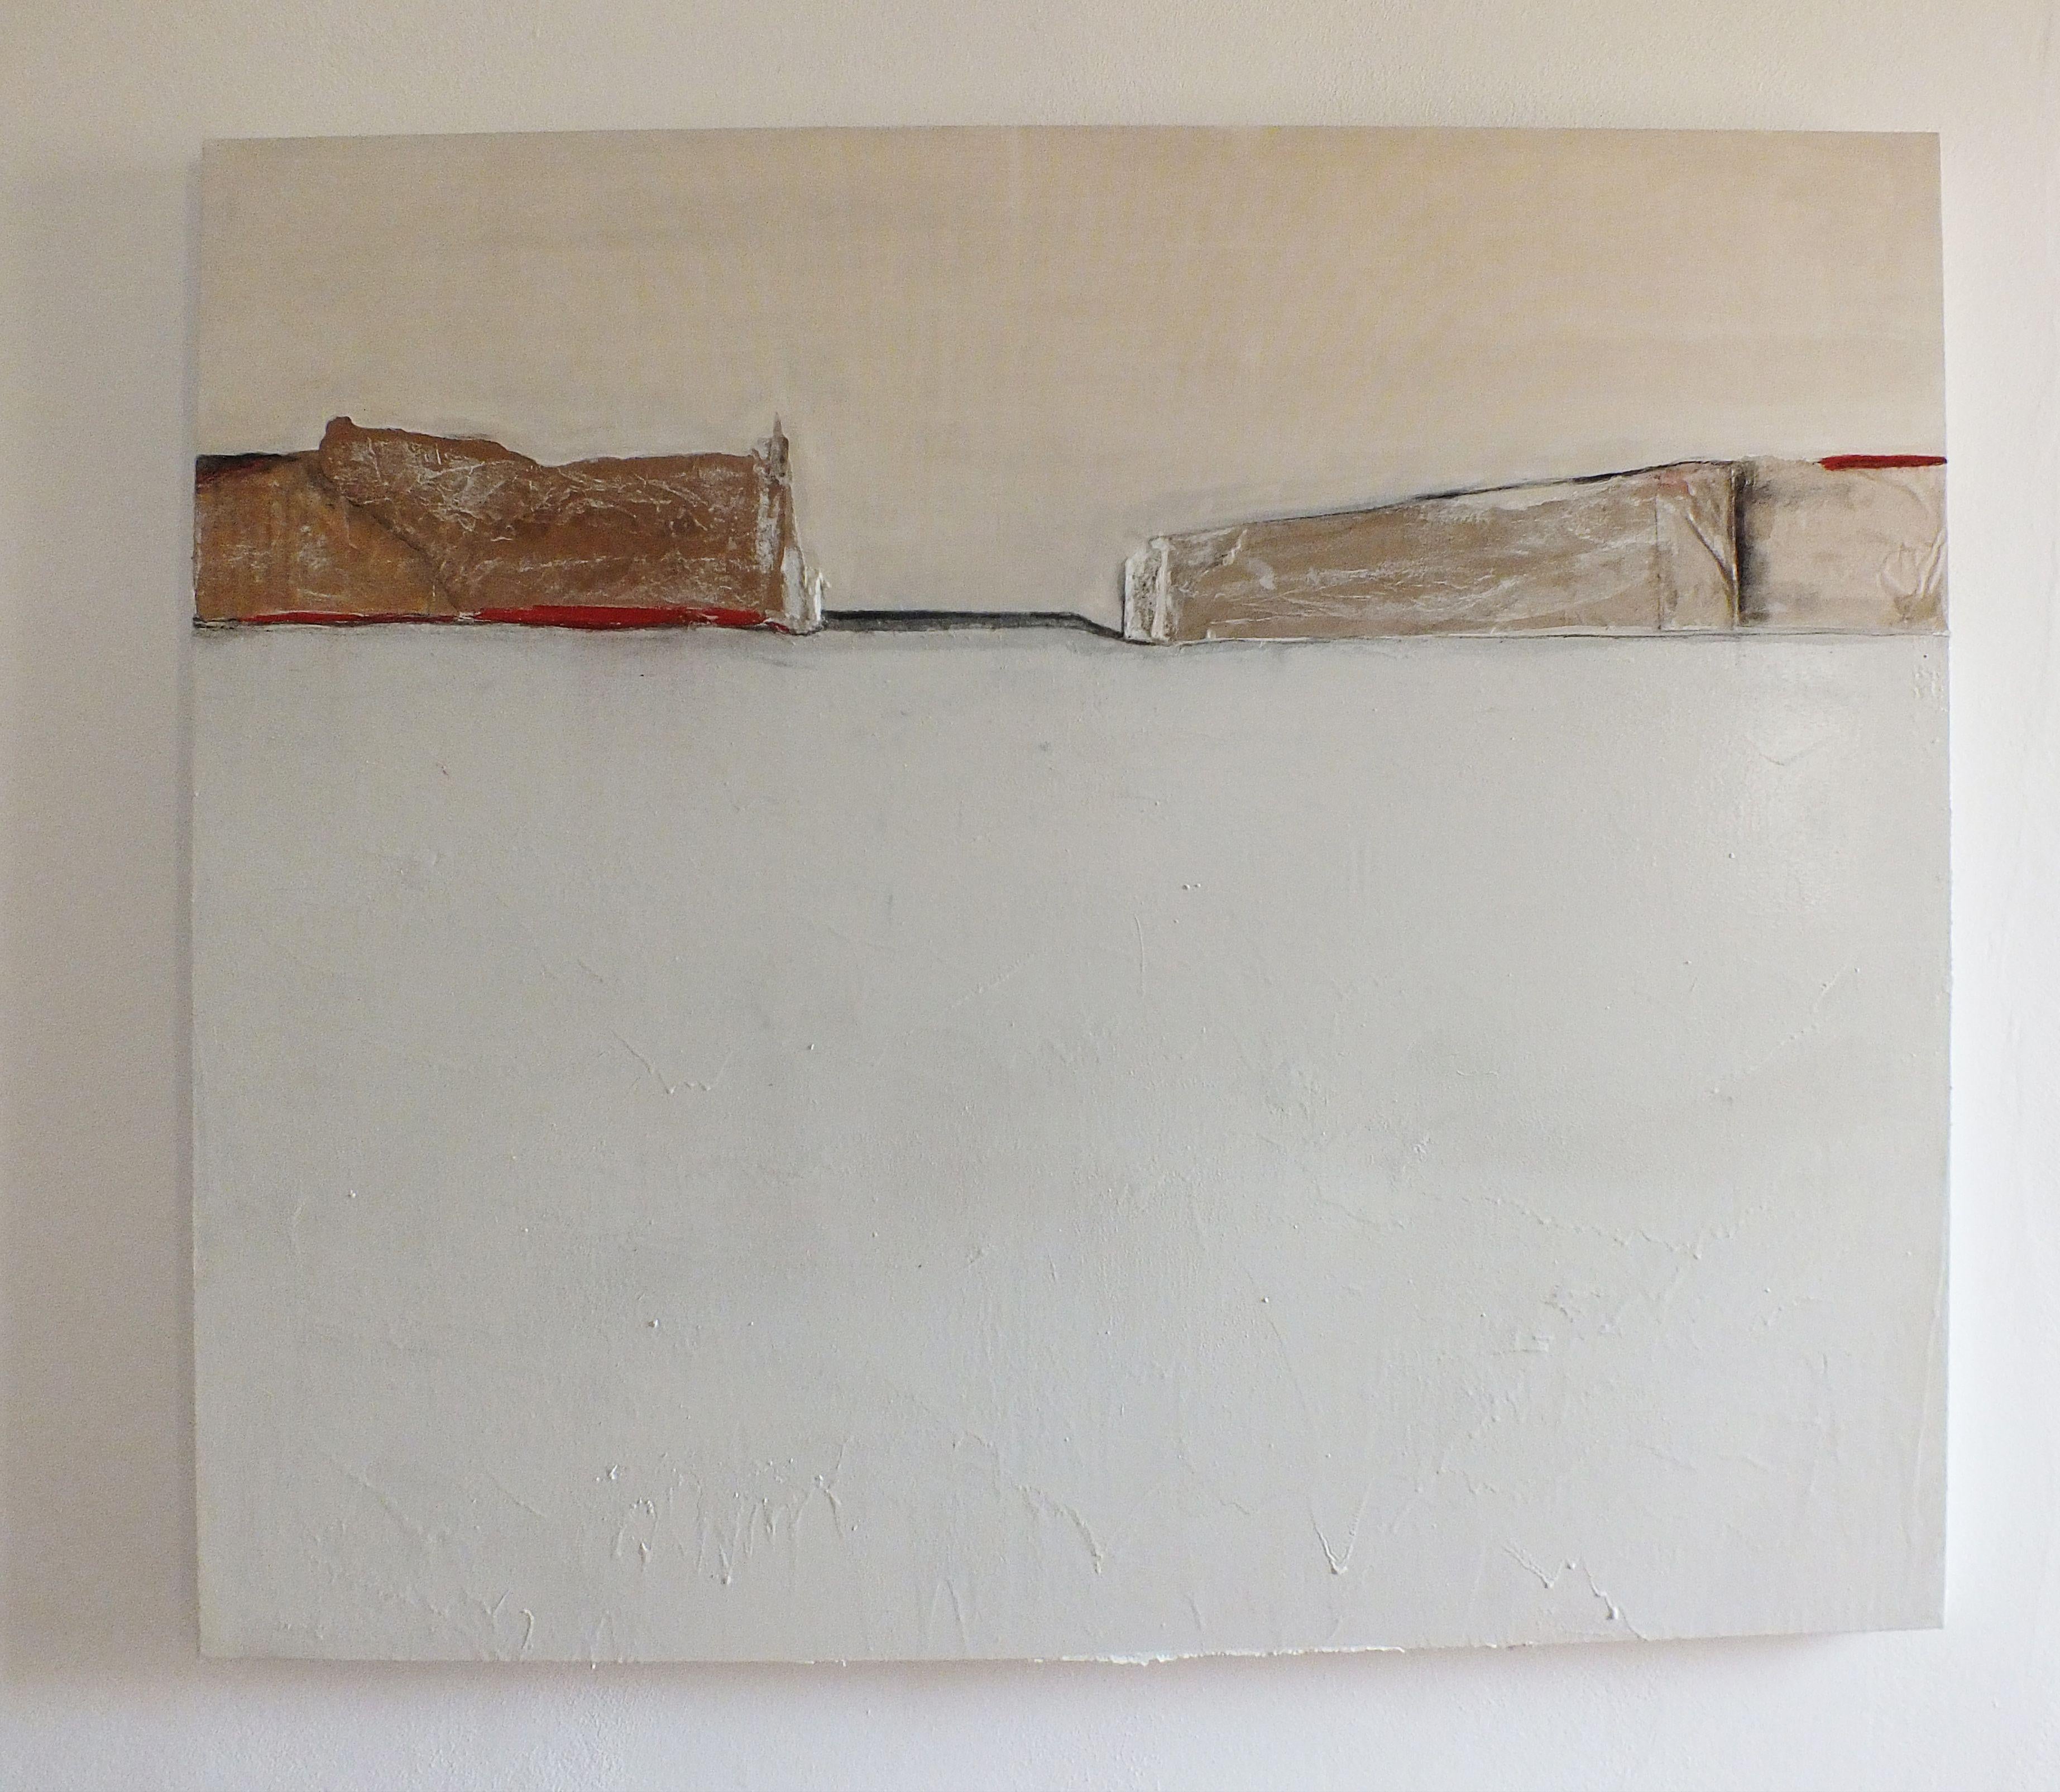 PaperLandscape#, Painting, Oil on Canvas - Gray Abstract Painting by Marilina Marchica